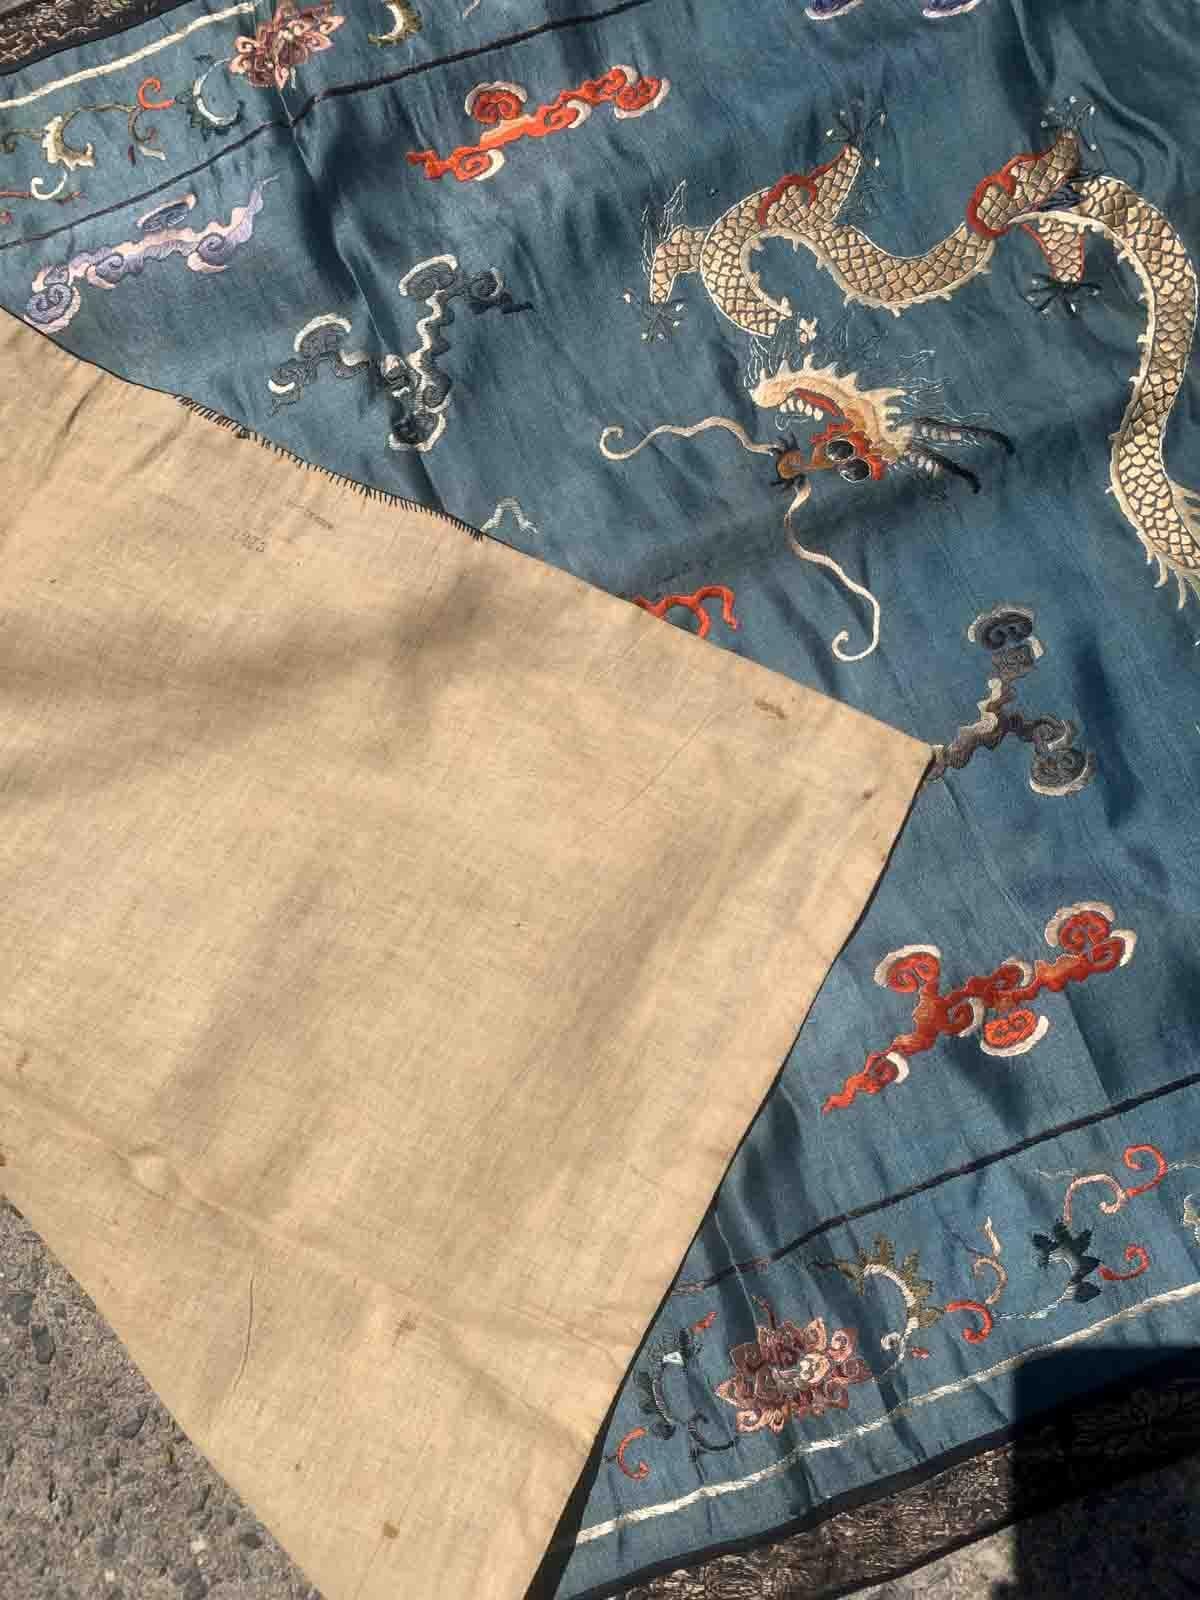 Handmade antique Chinese Dragon designed textile in silk. This tapestry is from the end of 19th century in original condition, it has some age discolorations.

-condition: original, some age discolorations,

-circa: 1870s,

-size: 2.6' x 3.8'